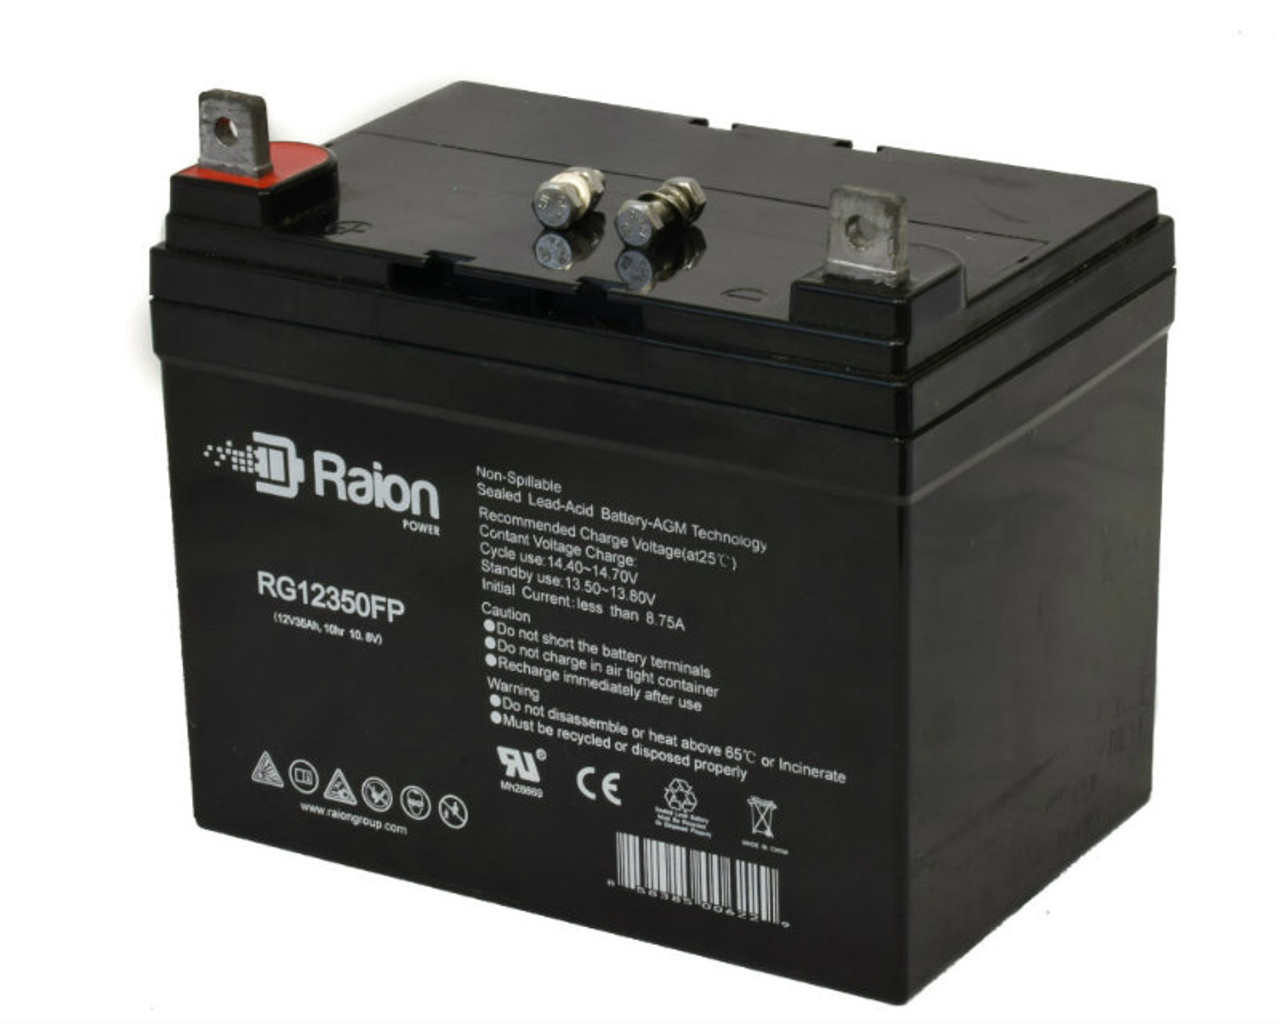 Raion Power Replacement 12V 35Ah RG12350FP Battery for Troy-Bilt Big Red Horse